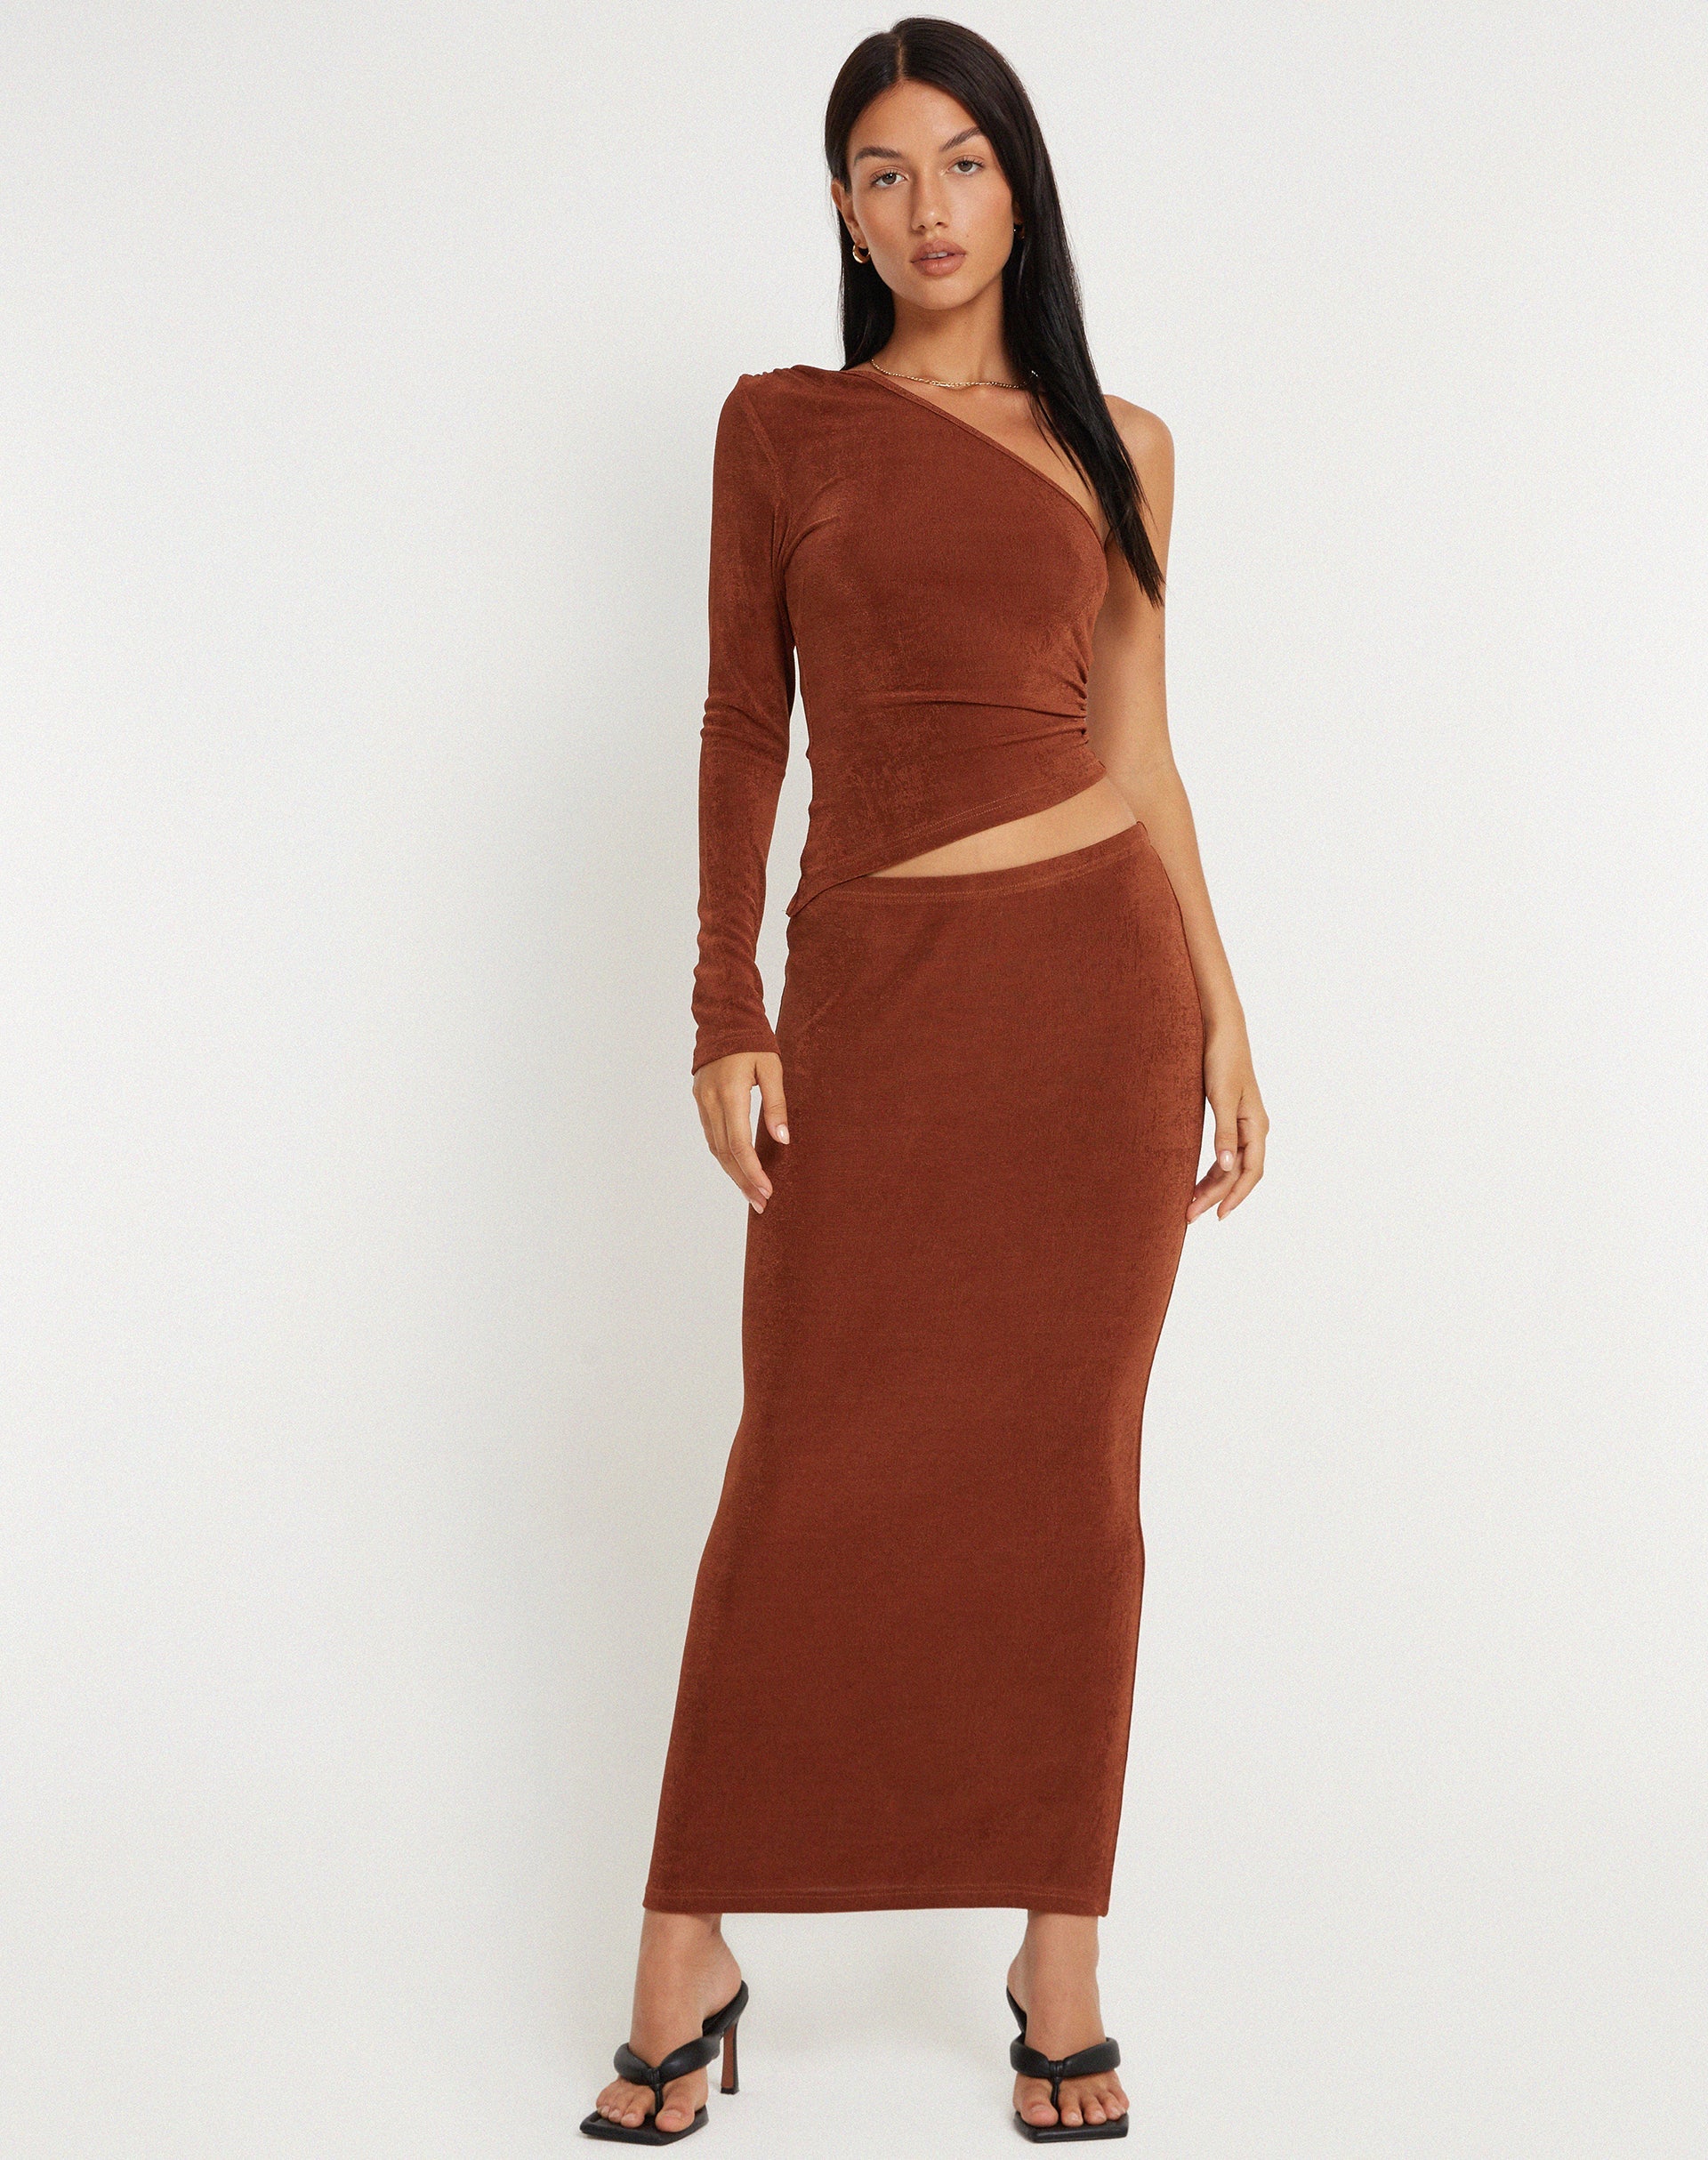 image of Tulus Maxi Skirt in Coffee Bean